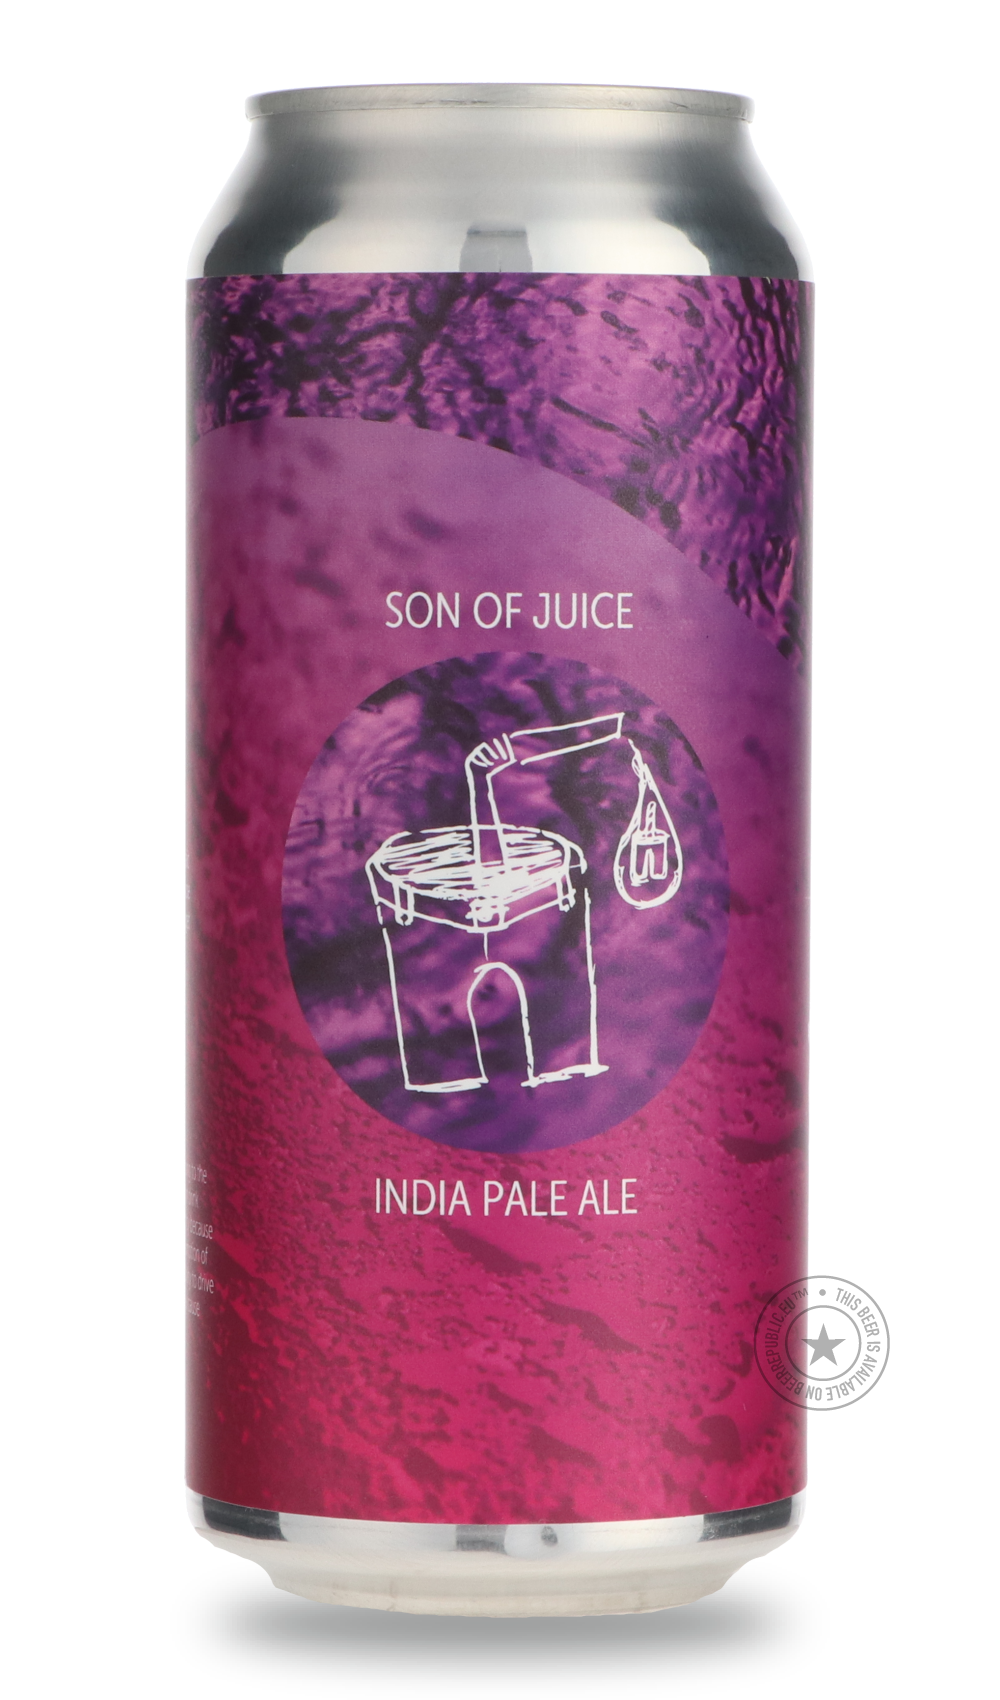 -Maplewood- Son of Juice-IPA- Only @ Beer Republic - The best online beer store for American & Canadian craft beer - Buy beer online from the USA and Canada - Bier online kopen - Amerikaans bier kopen - Craft beer store - Craft beer kopen - Amerikanisch bier kaufen - Bier online kaufen - Acheter biere online - IPA - Stout - Porter - New England IPA - Hazy IPA - Imperial Stout - Barrel Aged - Barrel Aged Imperial Stout - Brown - Dark beer - Blond - Blonde - Pilsner - Lager - Wheat - Weizen - Amber - Barley W